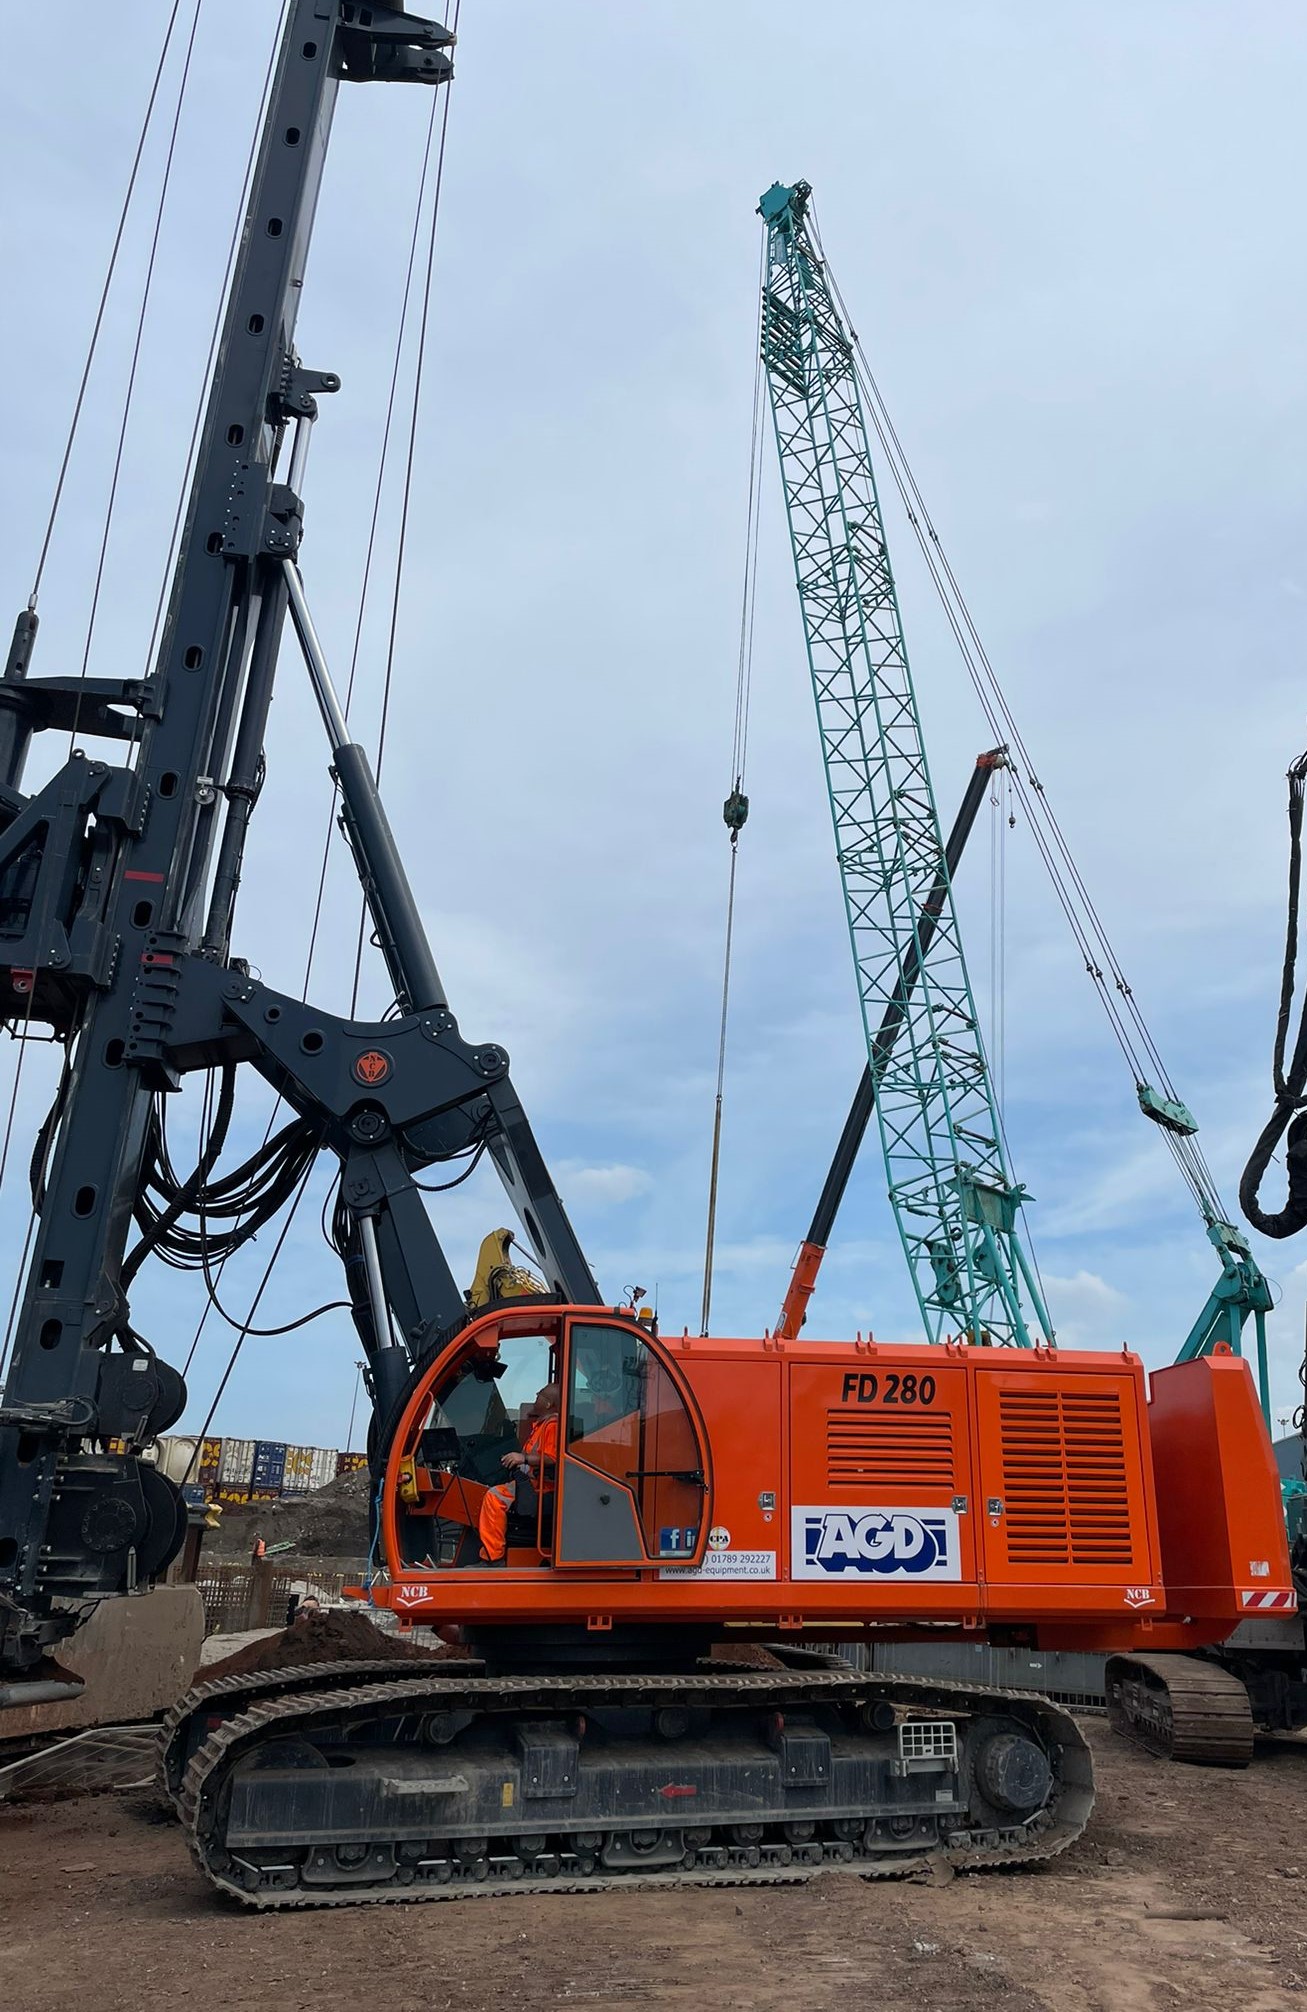 Suppliers of Reliable Rotary Piling Rig Rental Services UK